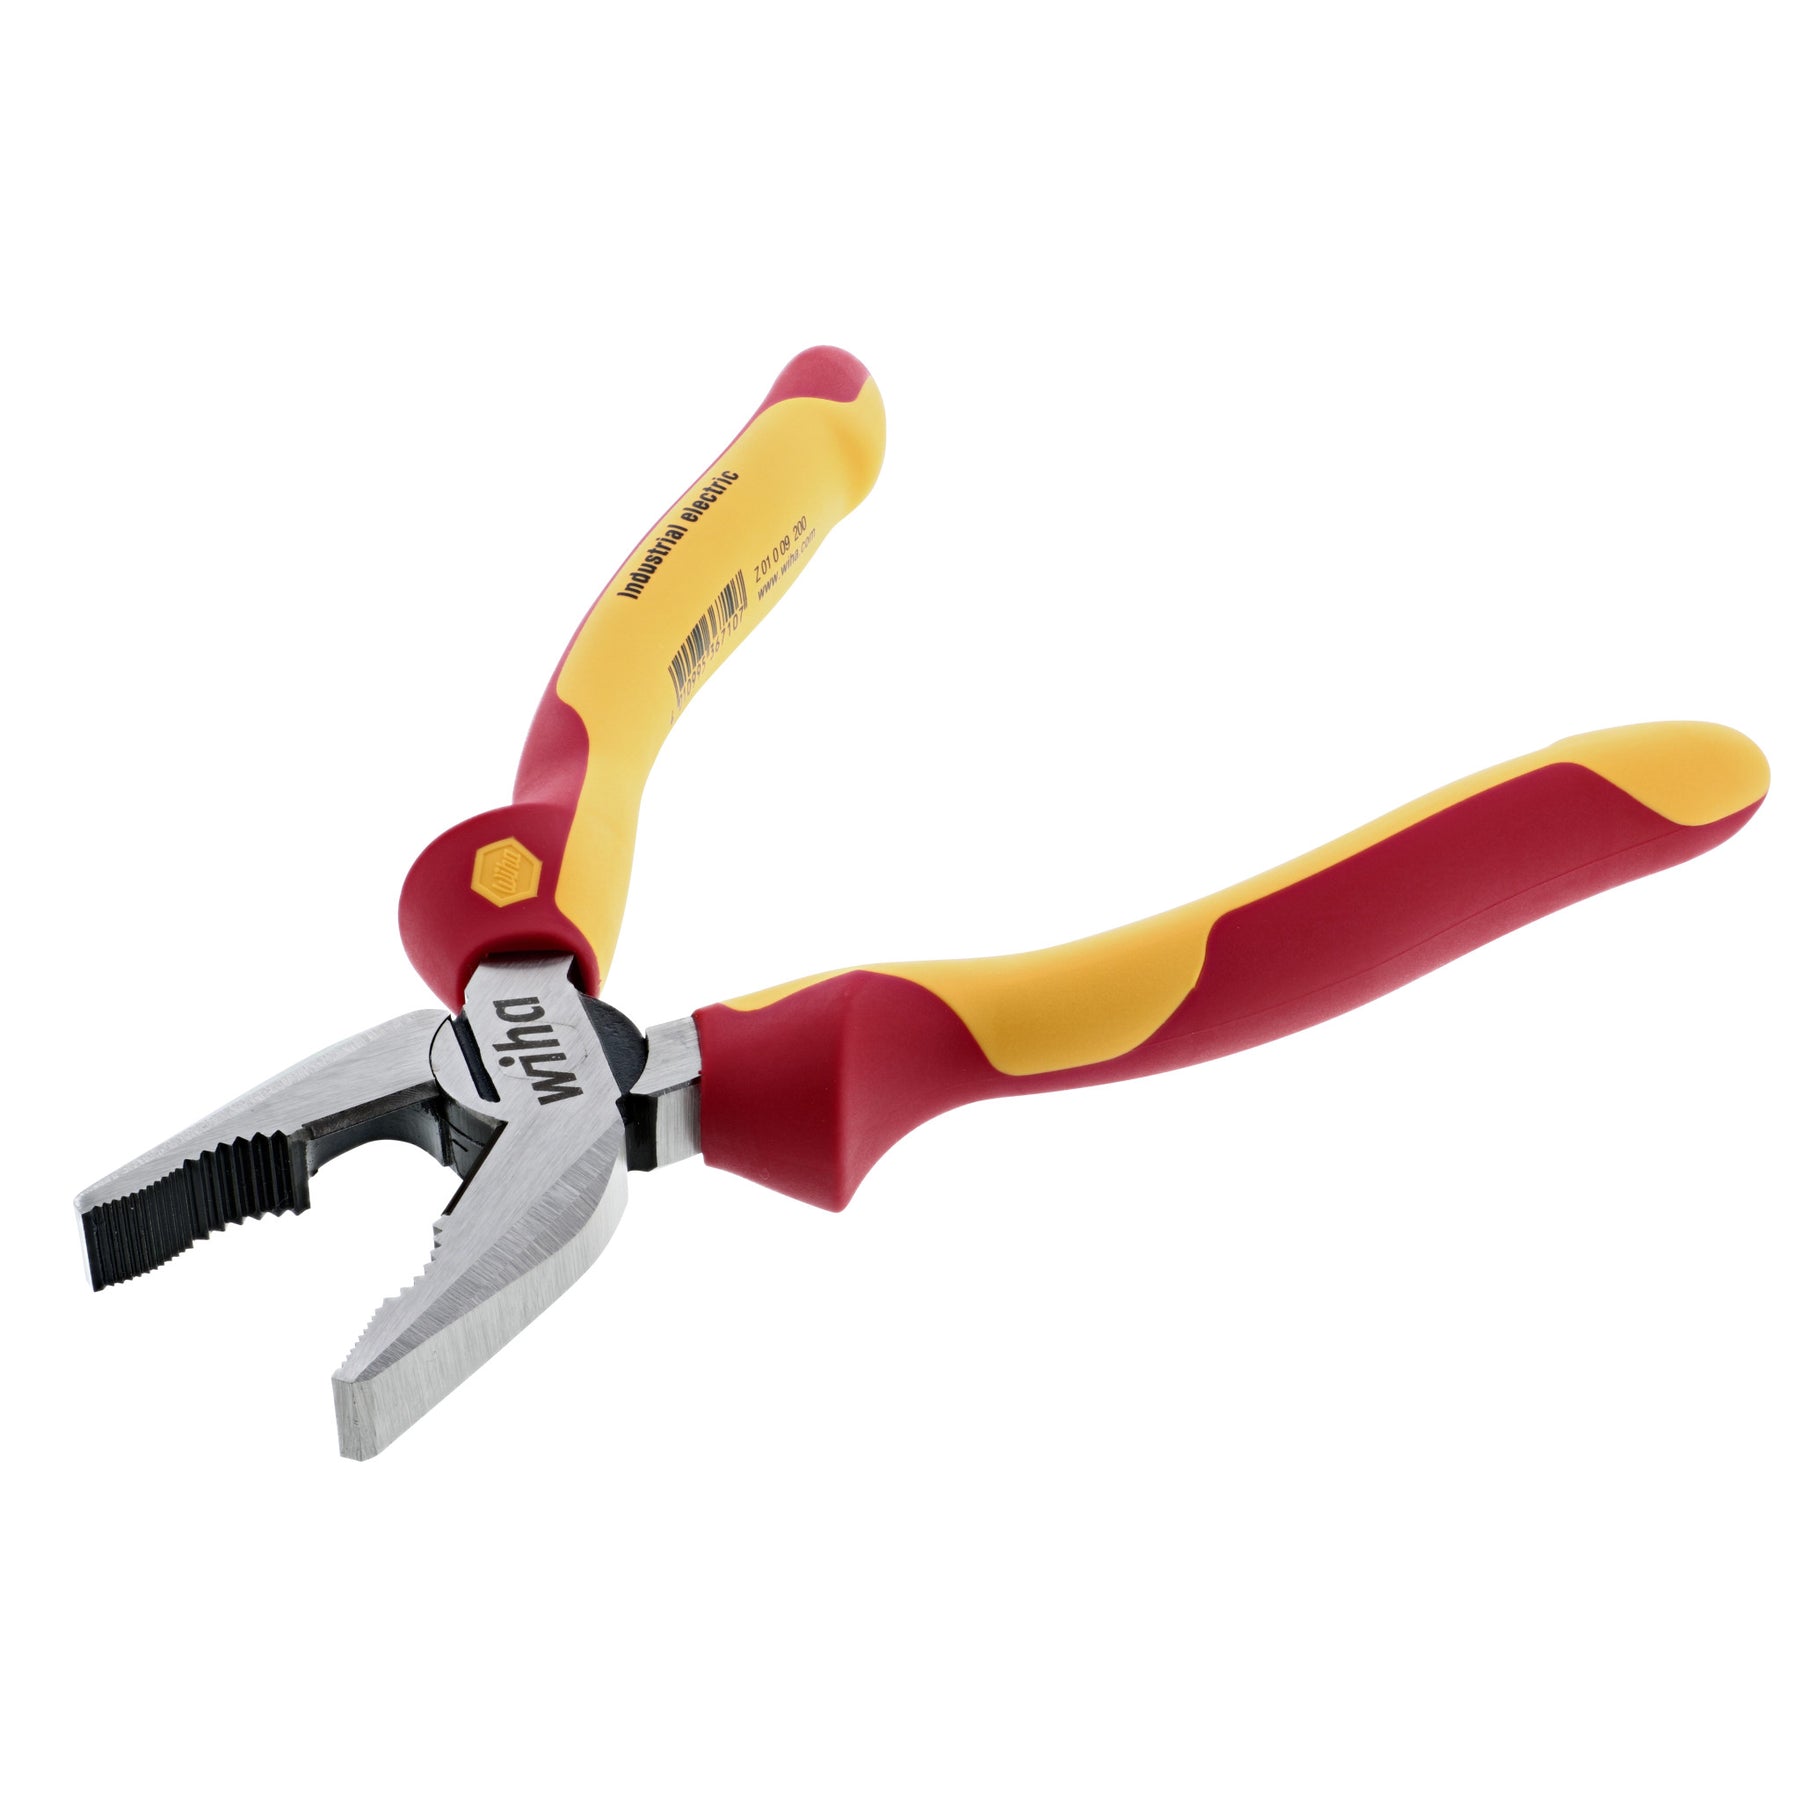 7 Piece Insulated Lineman's Pliers and Screwdriver Set